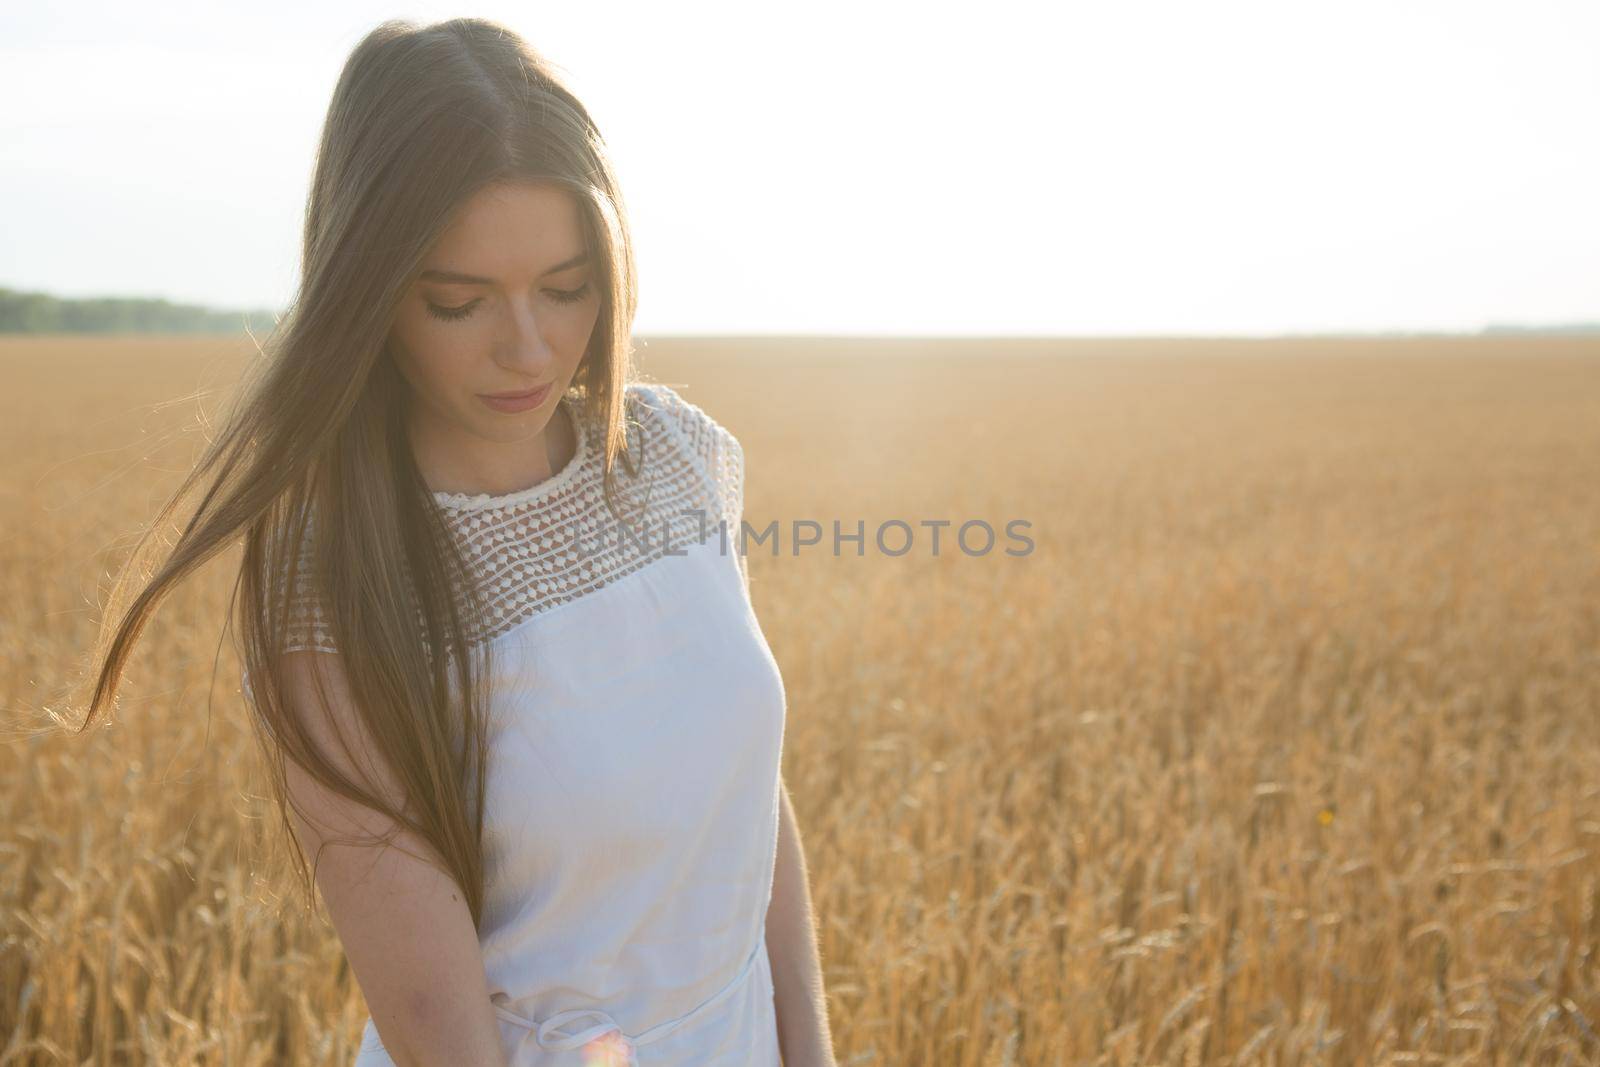 Pretty young woman in the field at sunset. Girl in summer yellow field over sun. Portrait of attractive woman over golden wheat field in summer day